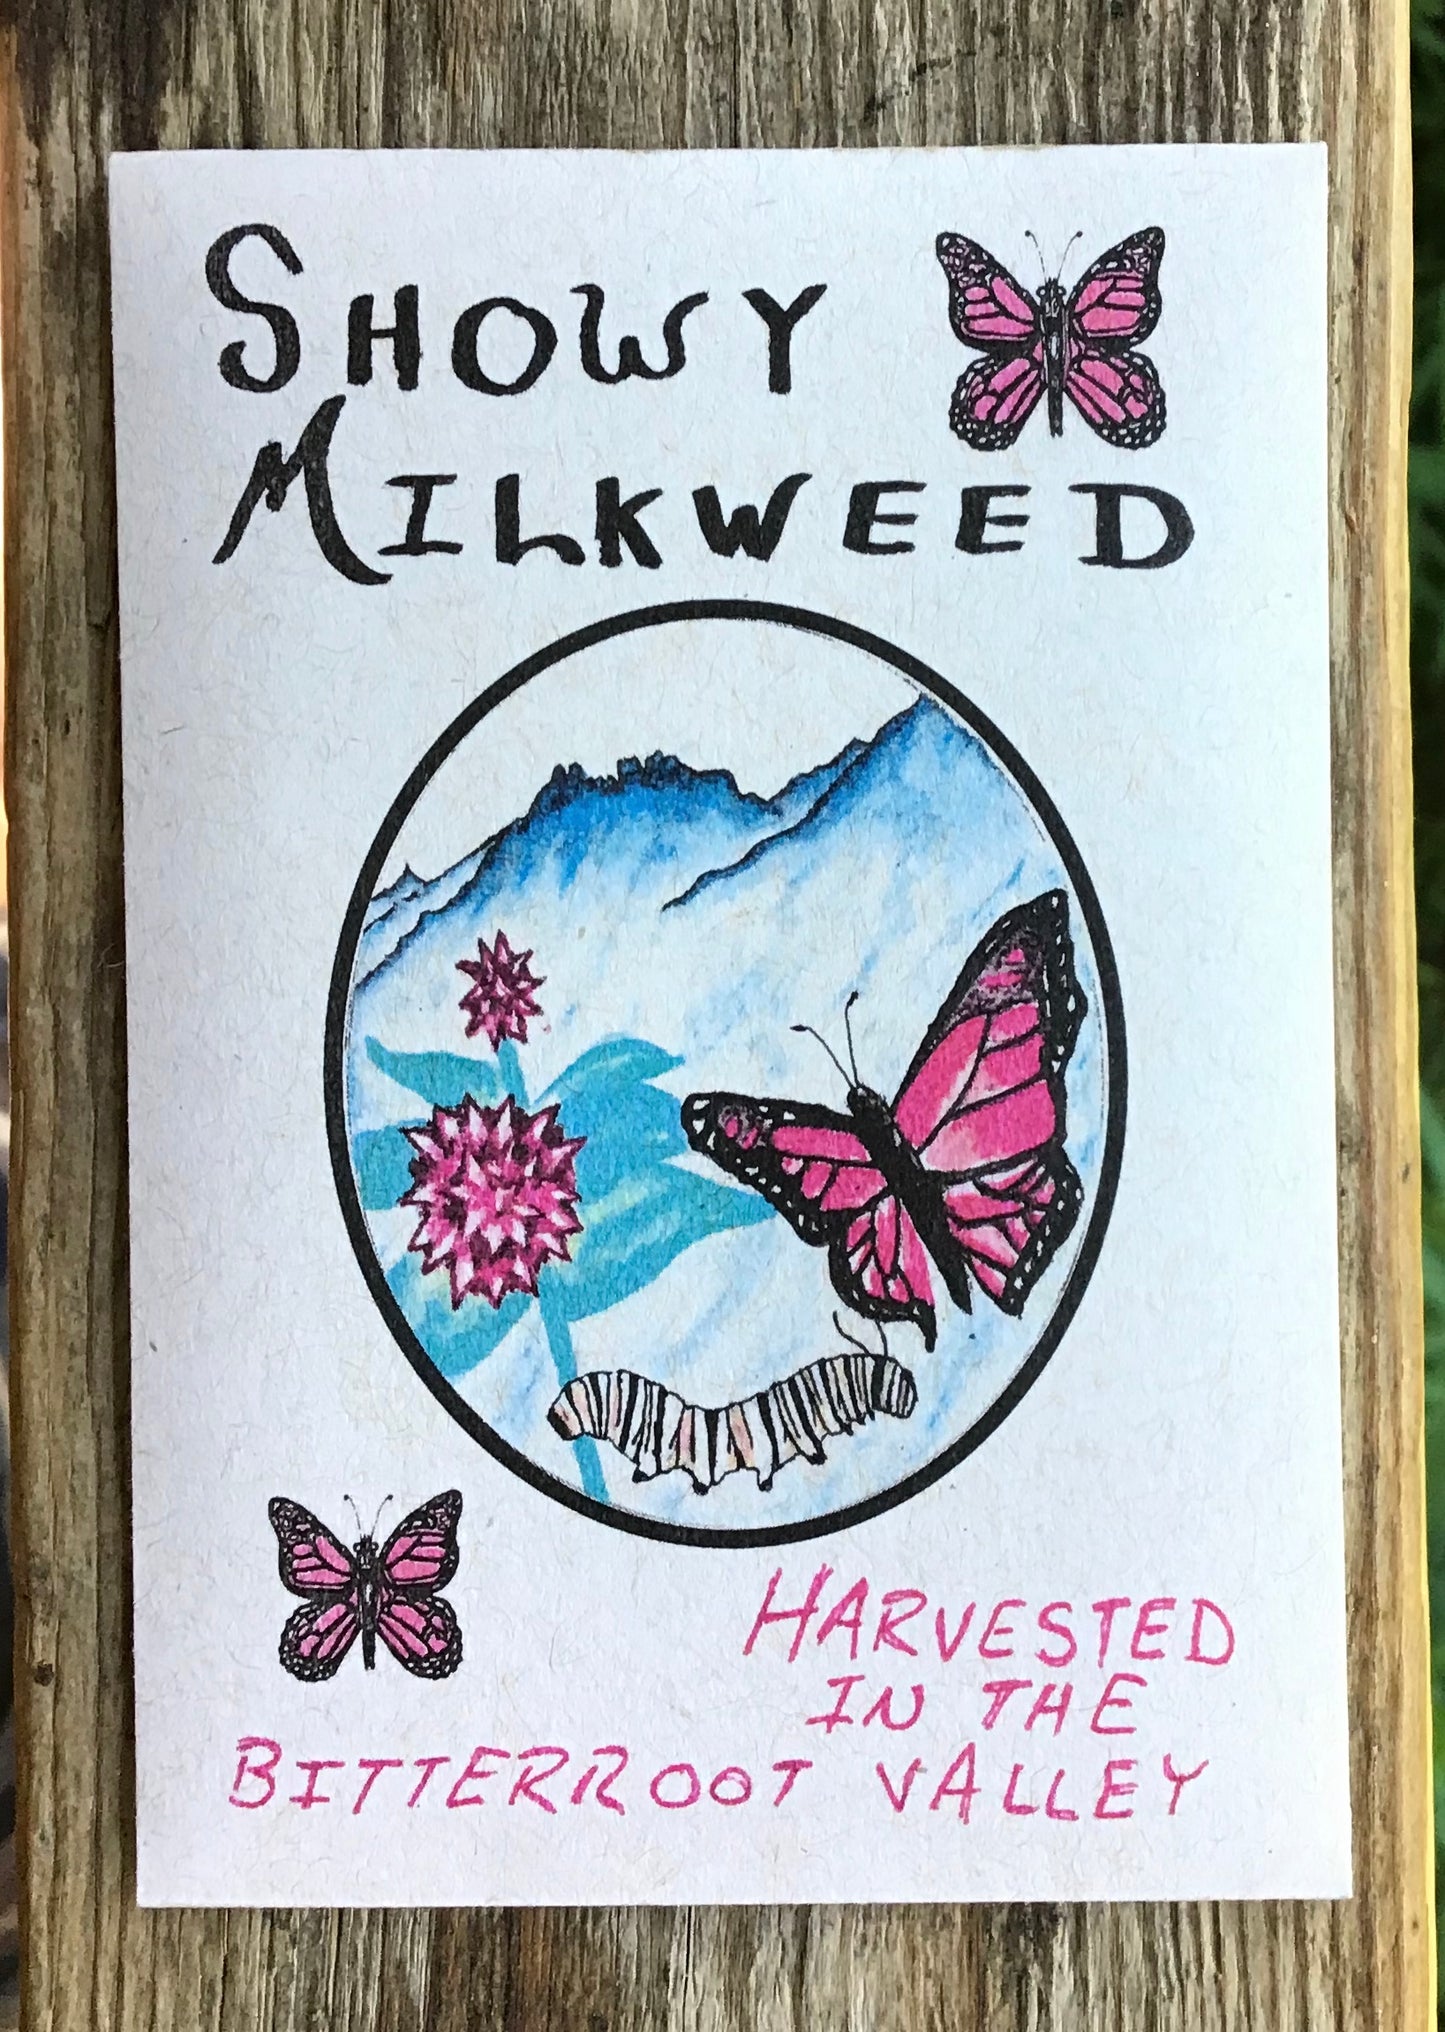 hand drawn seed packet art artwork showy milkweed seed high germination germ pollinators pollinator monarch butterflies butterfly bitterroot valley western montana packets printed solar power Asclepias speciosa cordage primitive fishing line gear